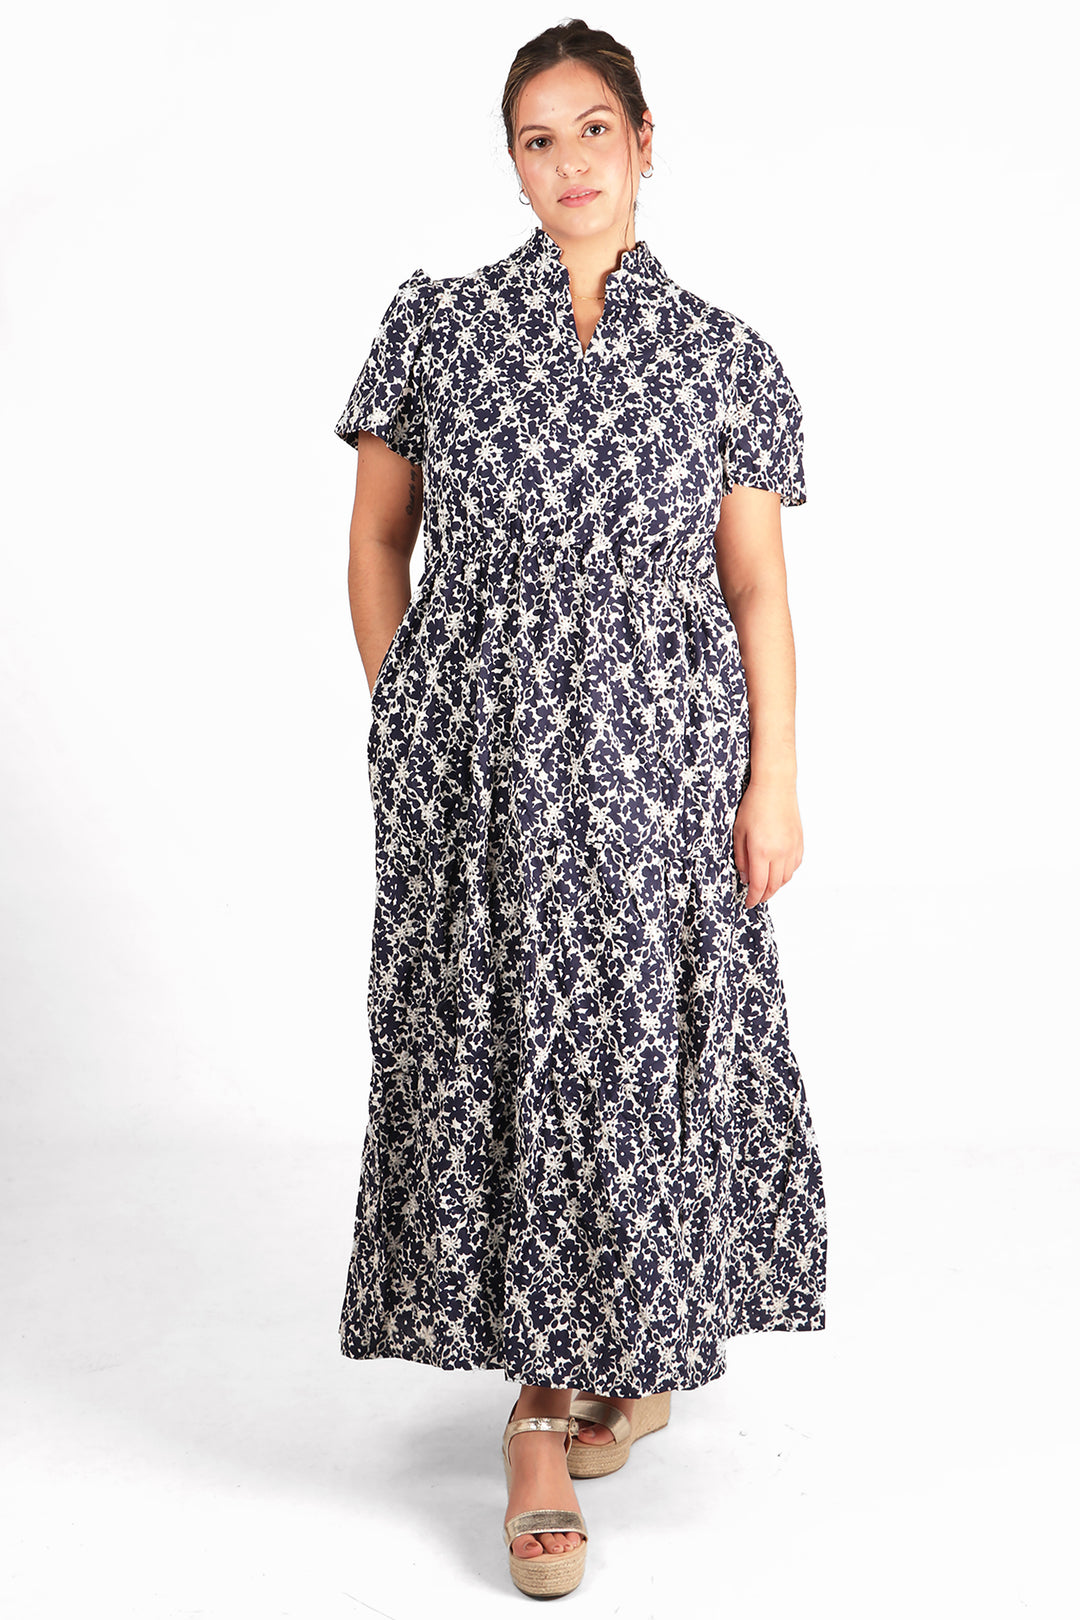 model wearing a maxi cotton dress with an all over floral broderie anglaise pattern, the dress is navy blue and white with short sleeves 